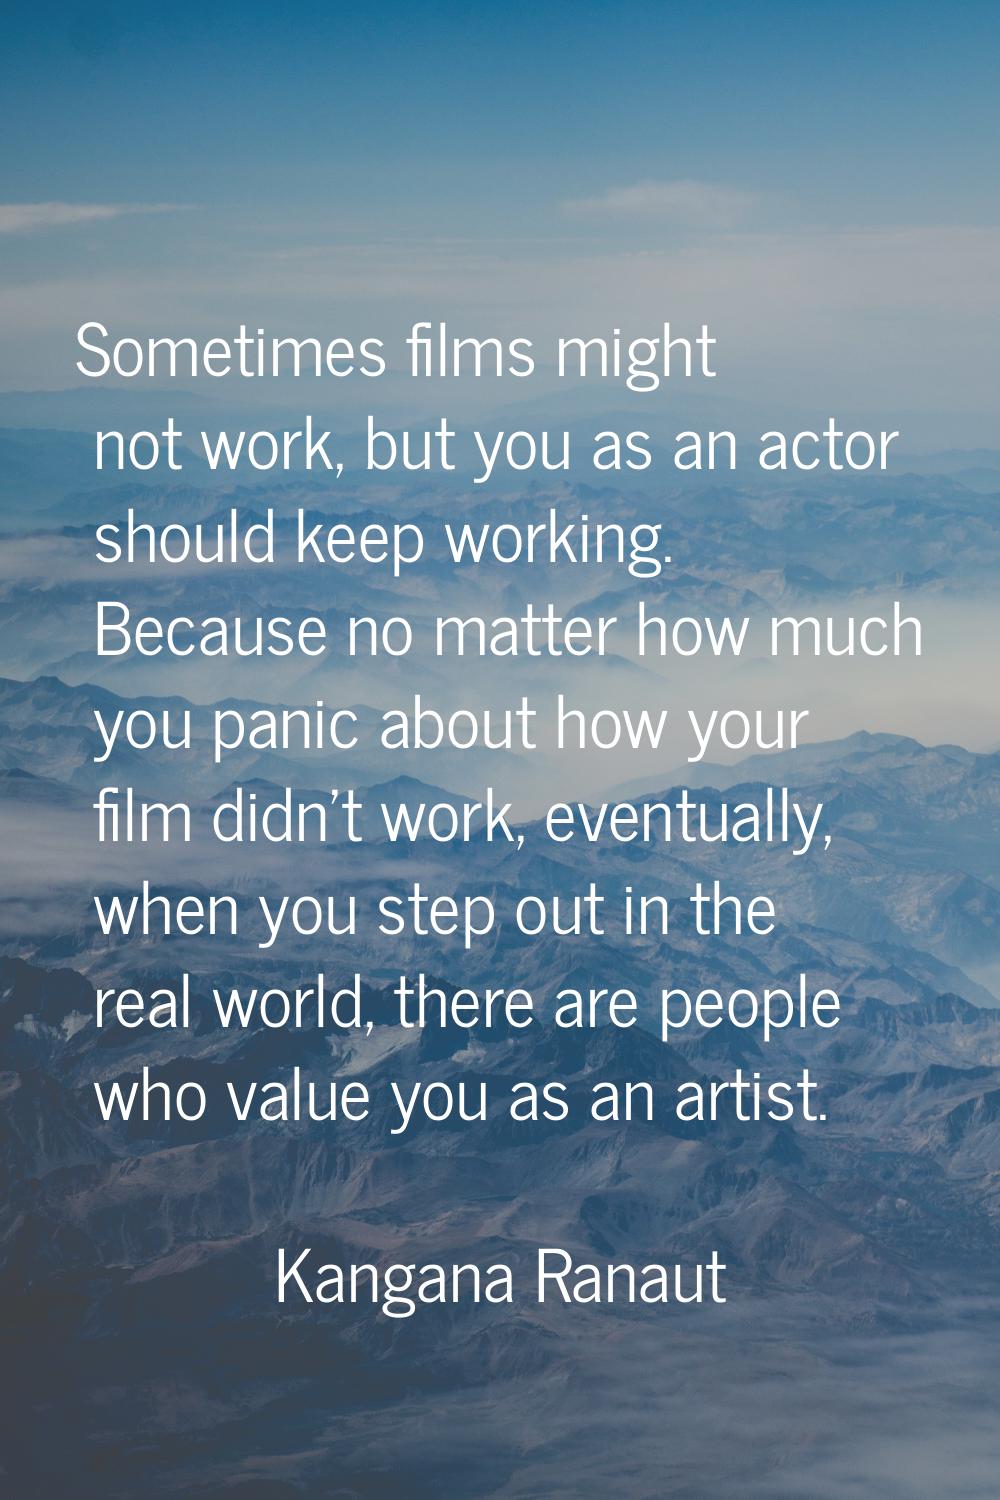 Sometimes films might not work, but you as an actor should keep working. Because no matter how much